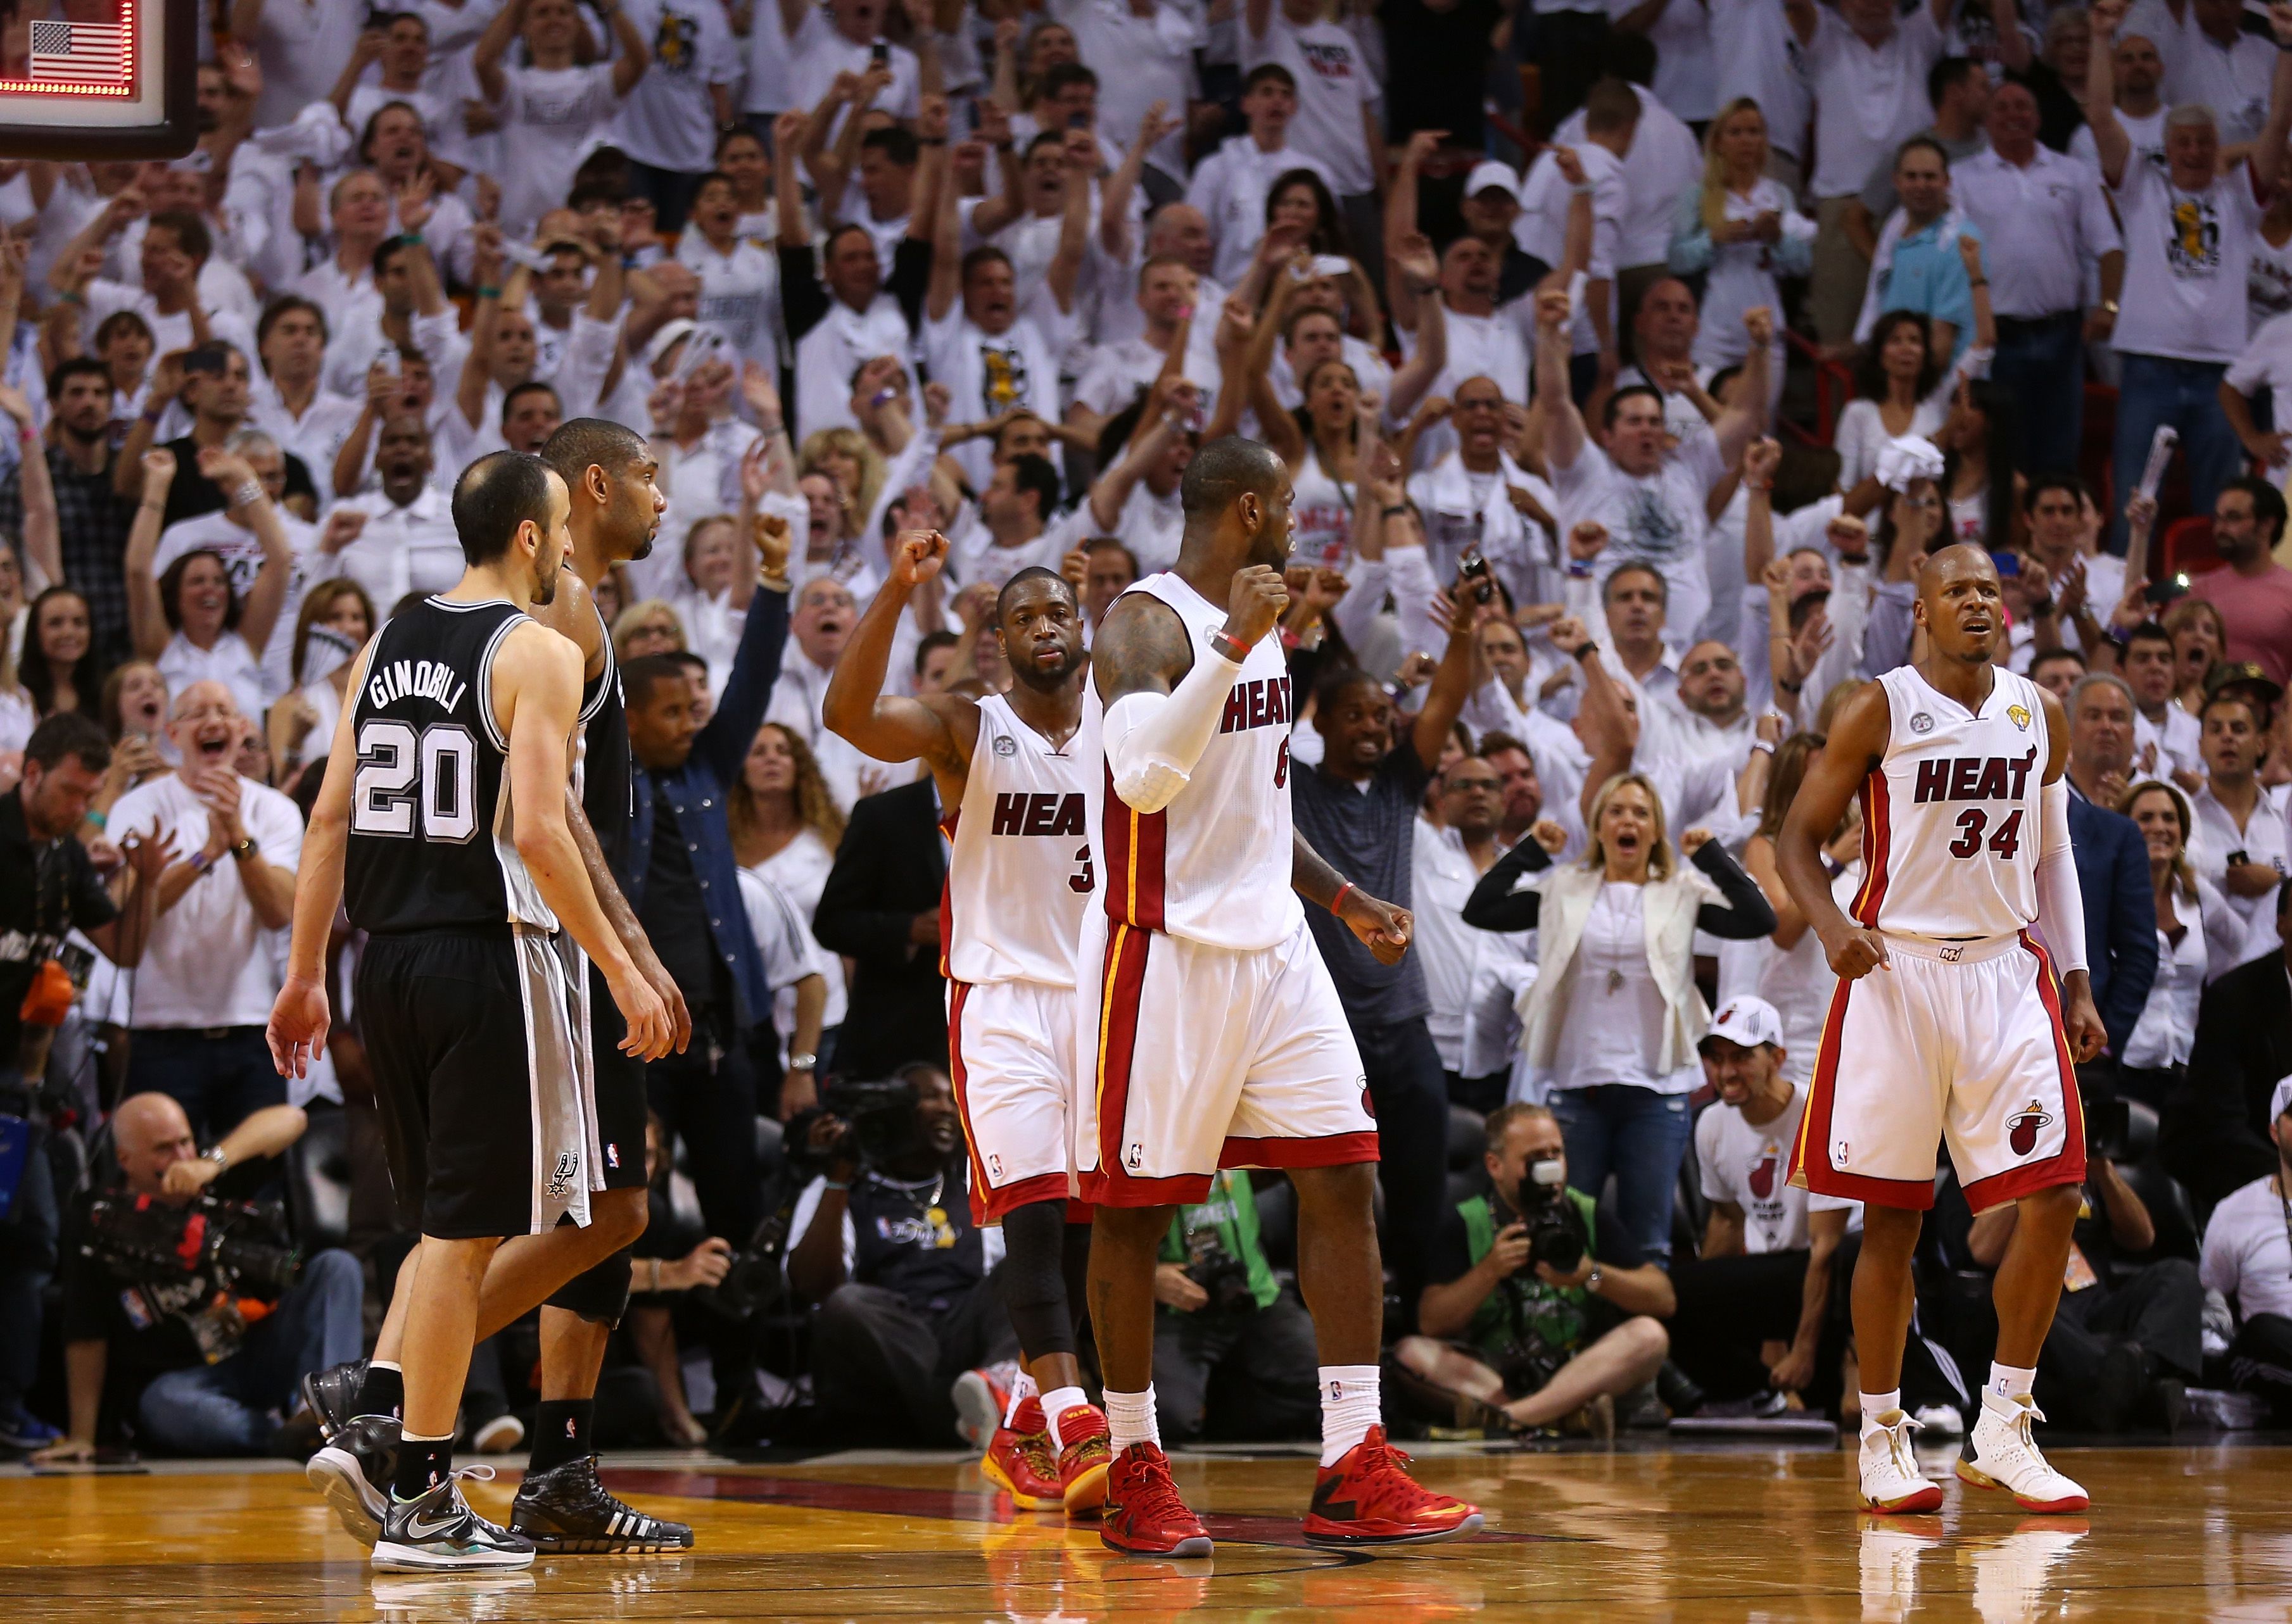 Most NBA Finals 3 pointers before Danny Green and Ray Allen?